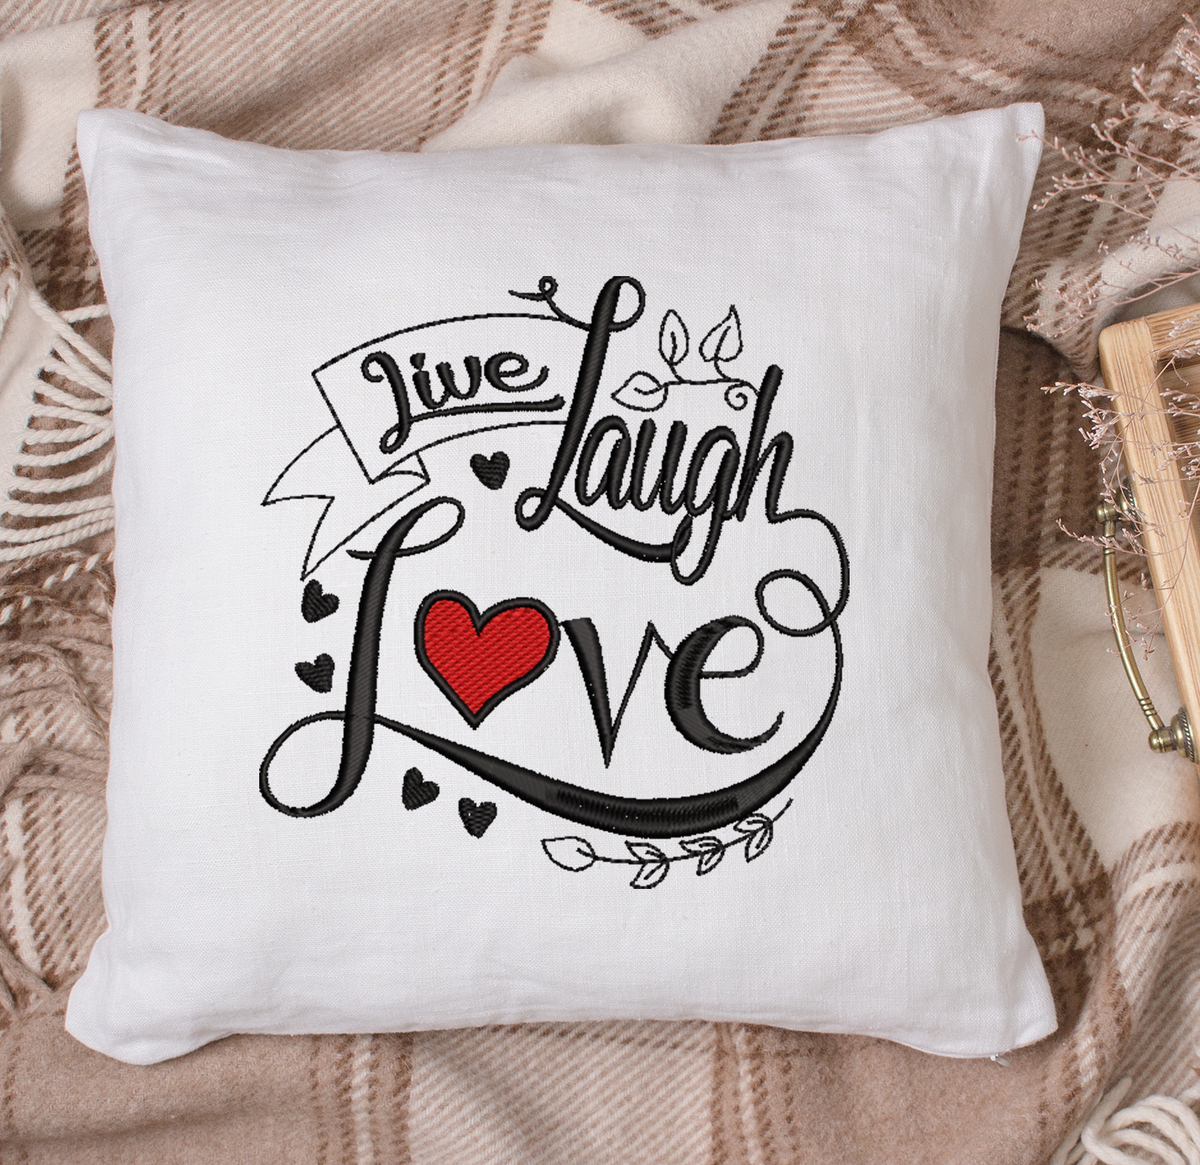 Live Laugh Love 2020 Embroidery Design - Oh My Crafty Supplies Inc.